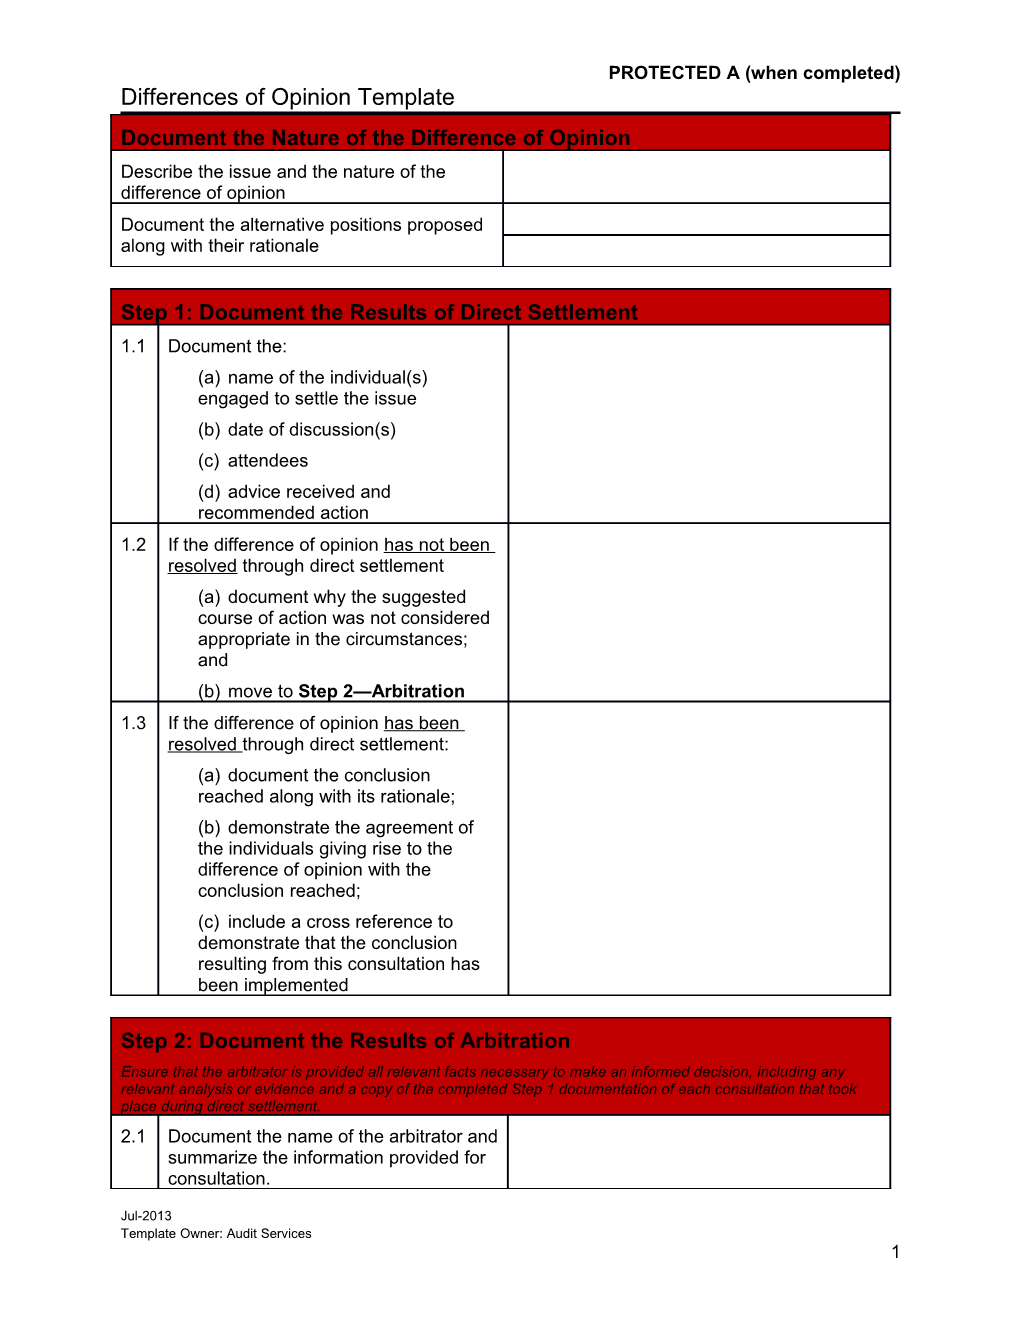 OAG Differences of Opinion Template